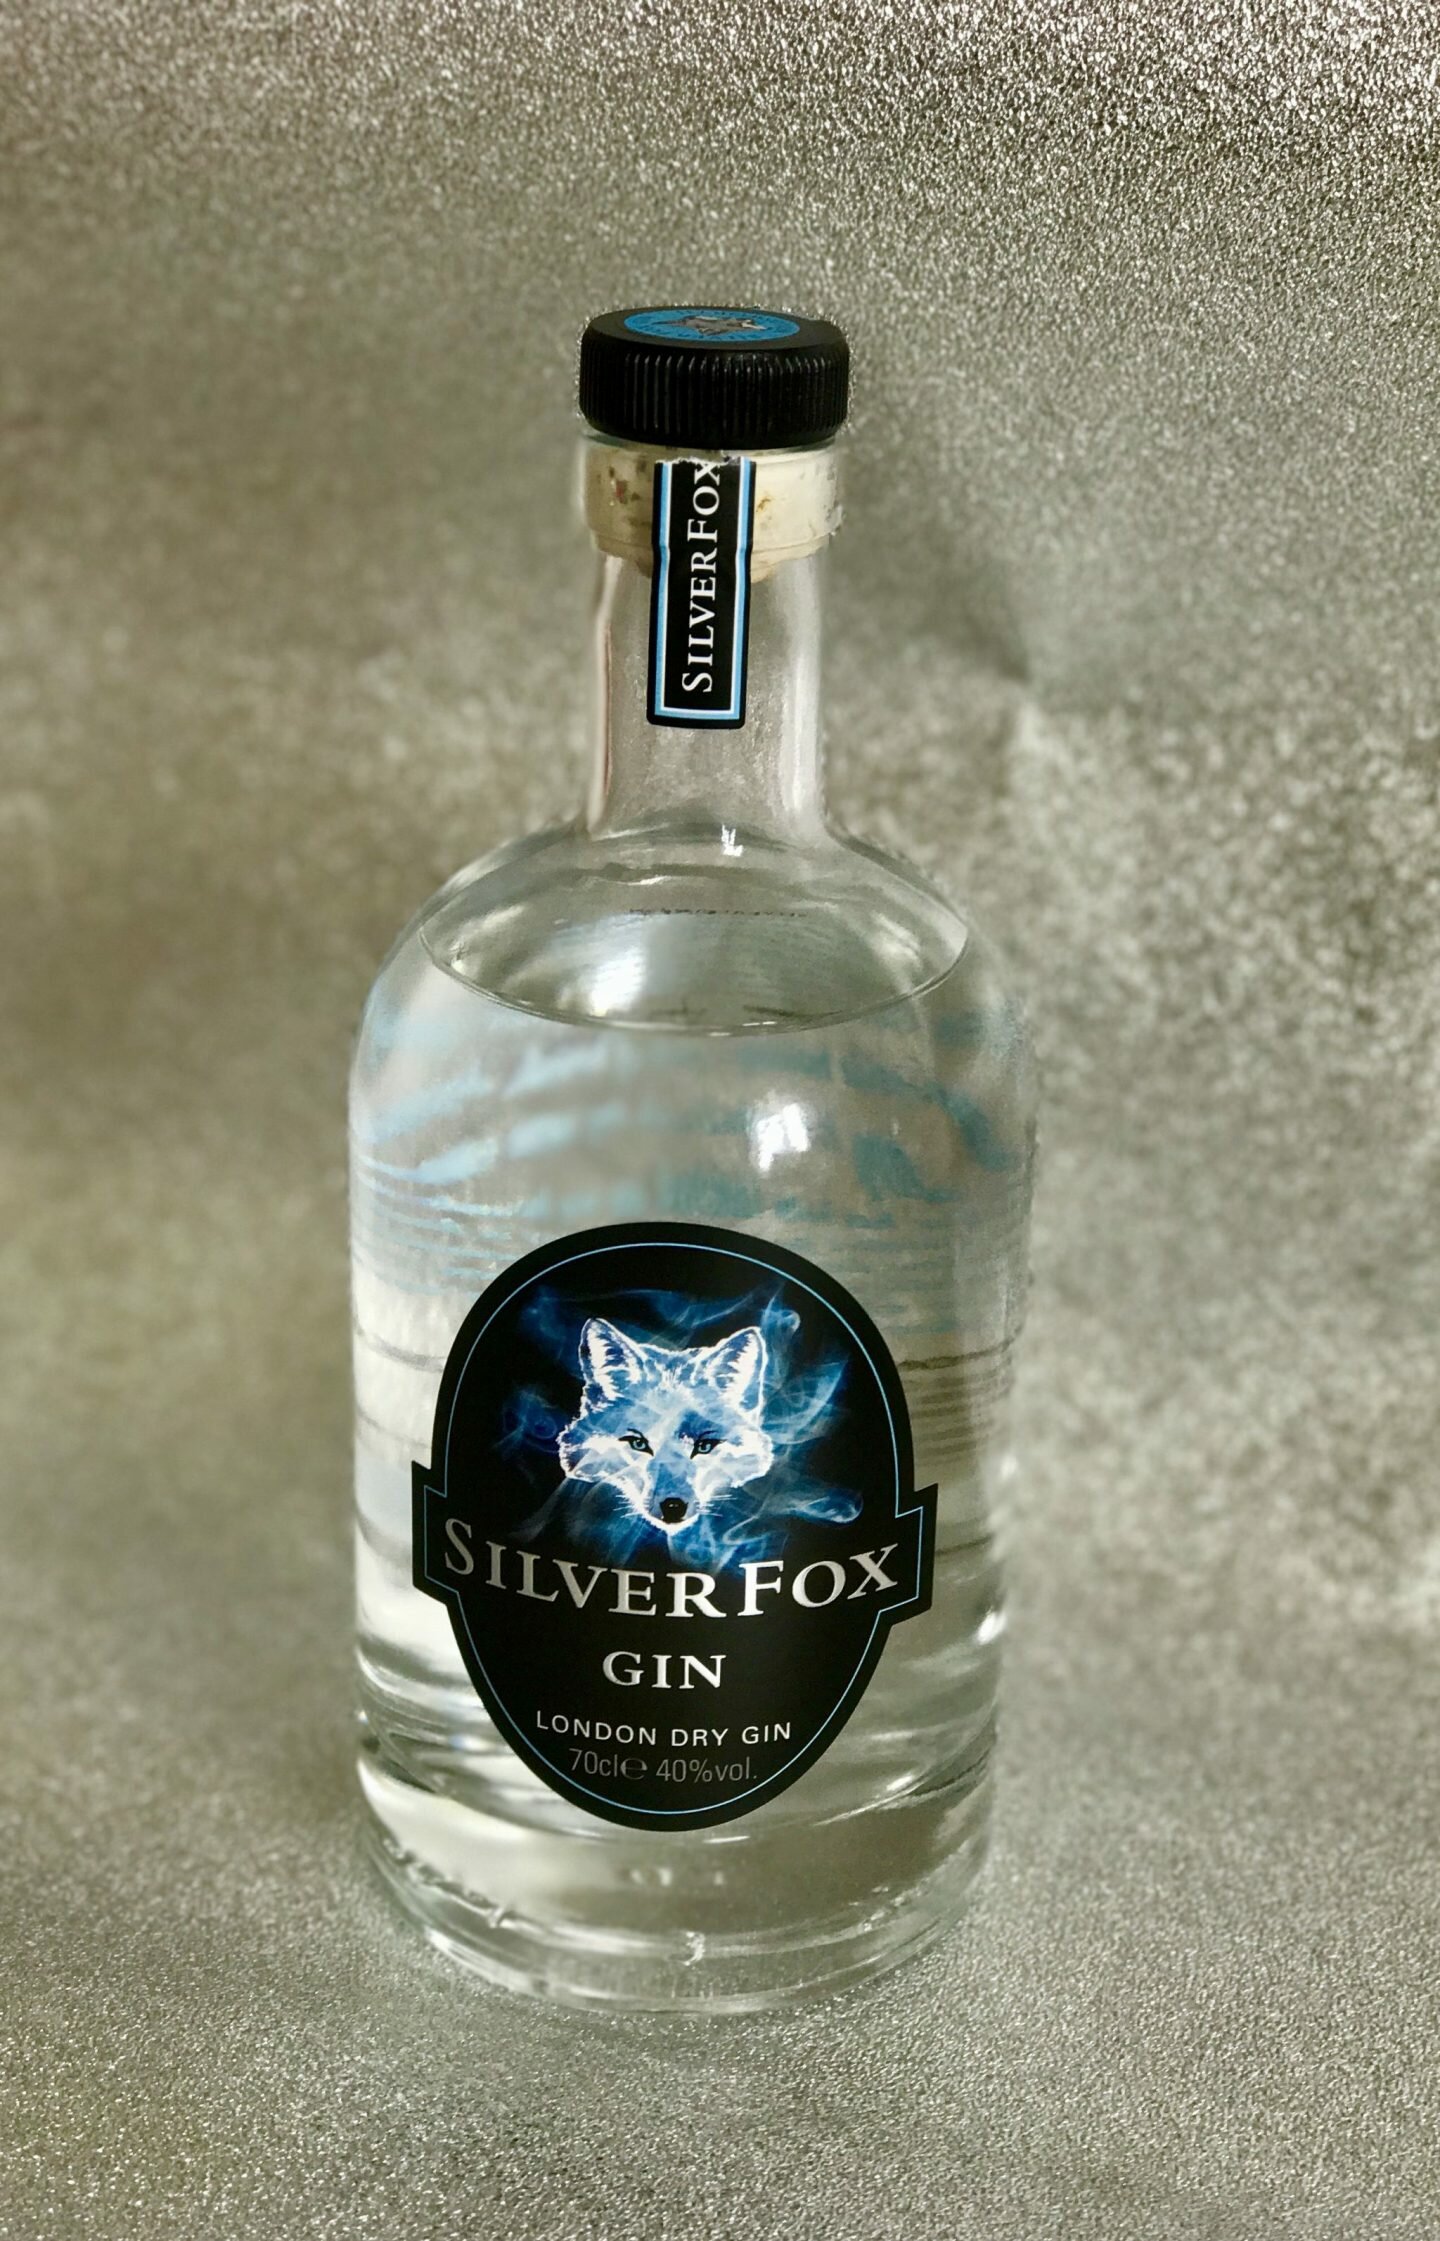 There’s a new Gin…made in my town! Silver Fox Gin!